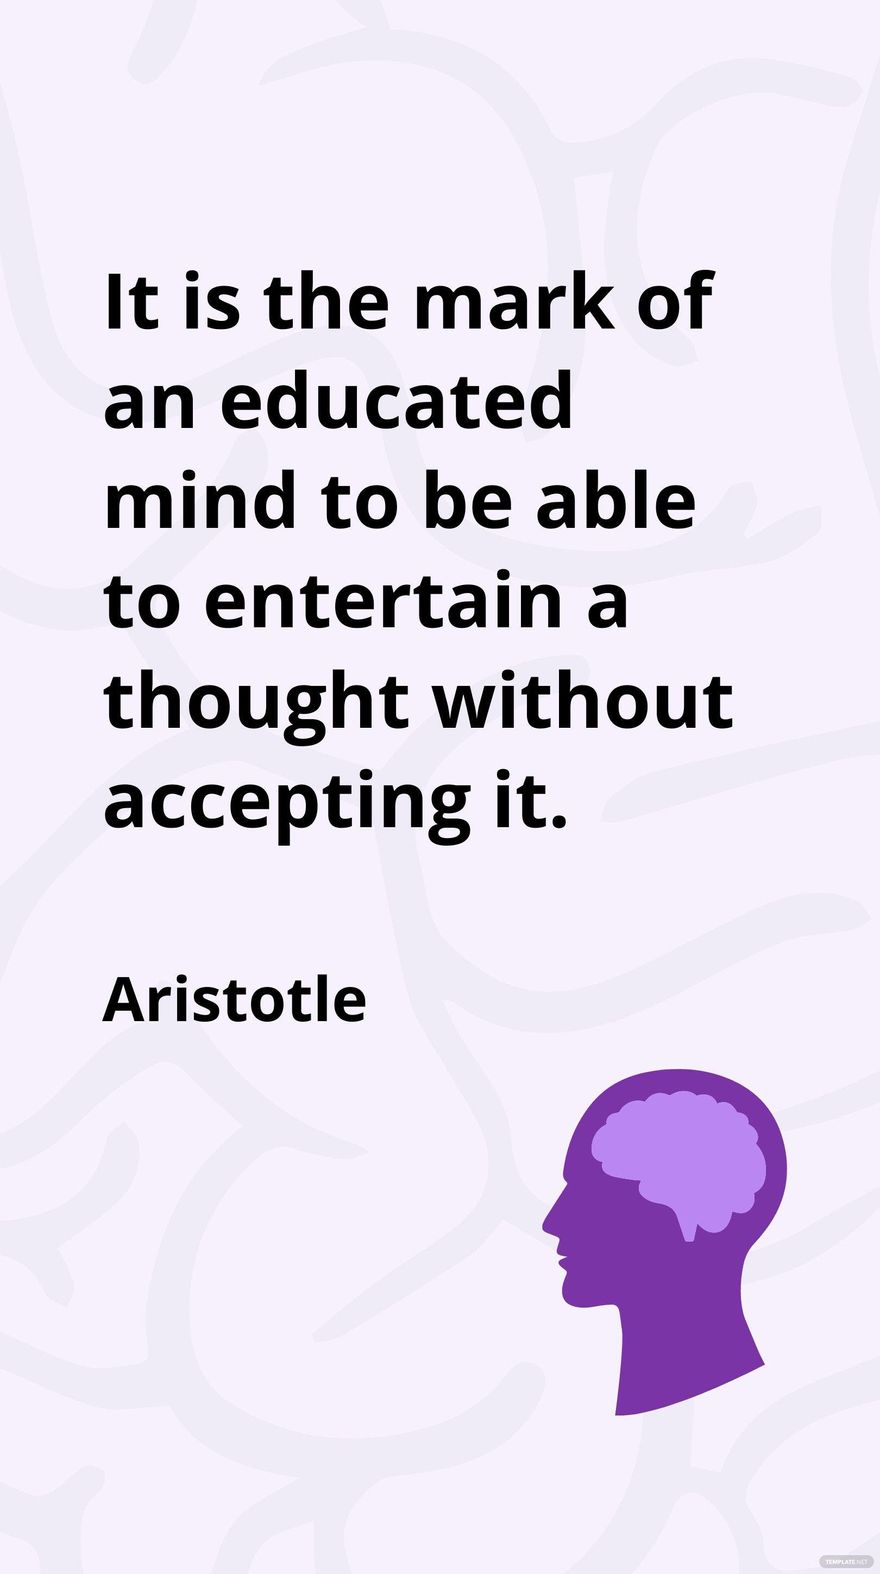 Aristotle -It is the mark of an educated mind to be able to entertain a thought without accepting it.